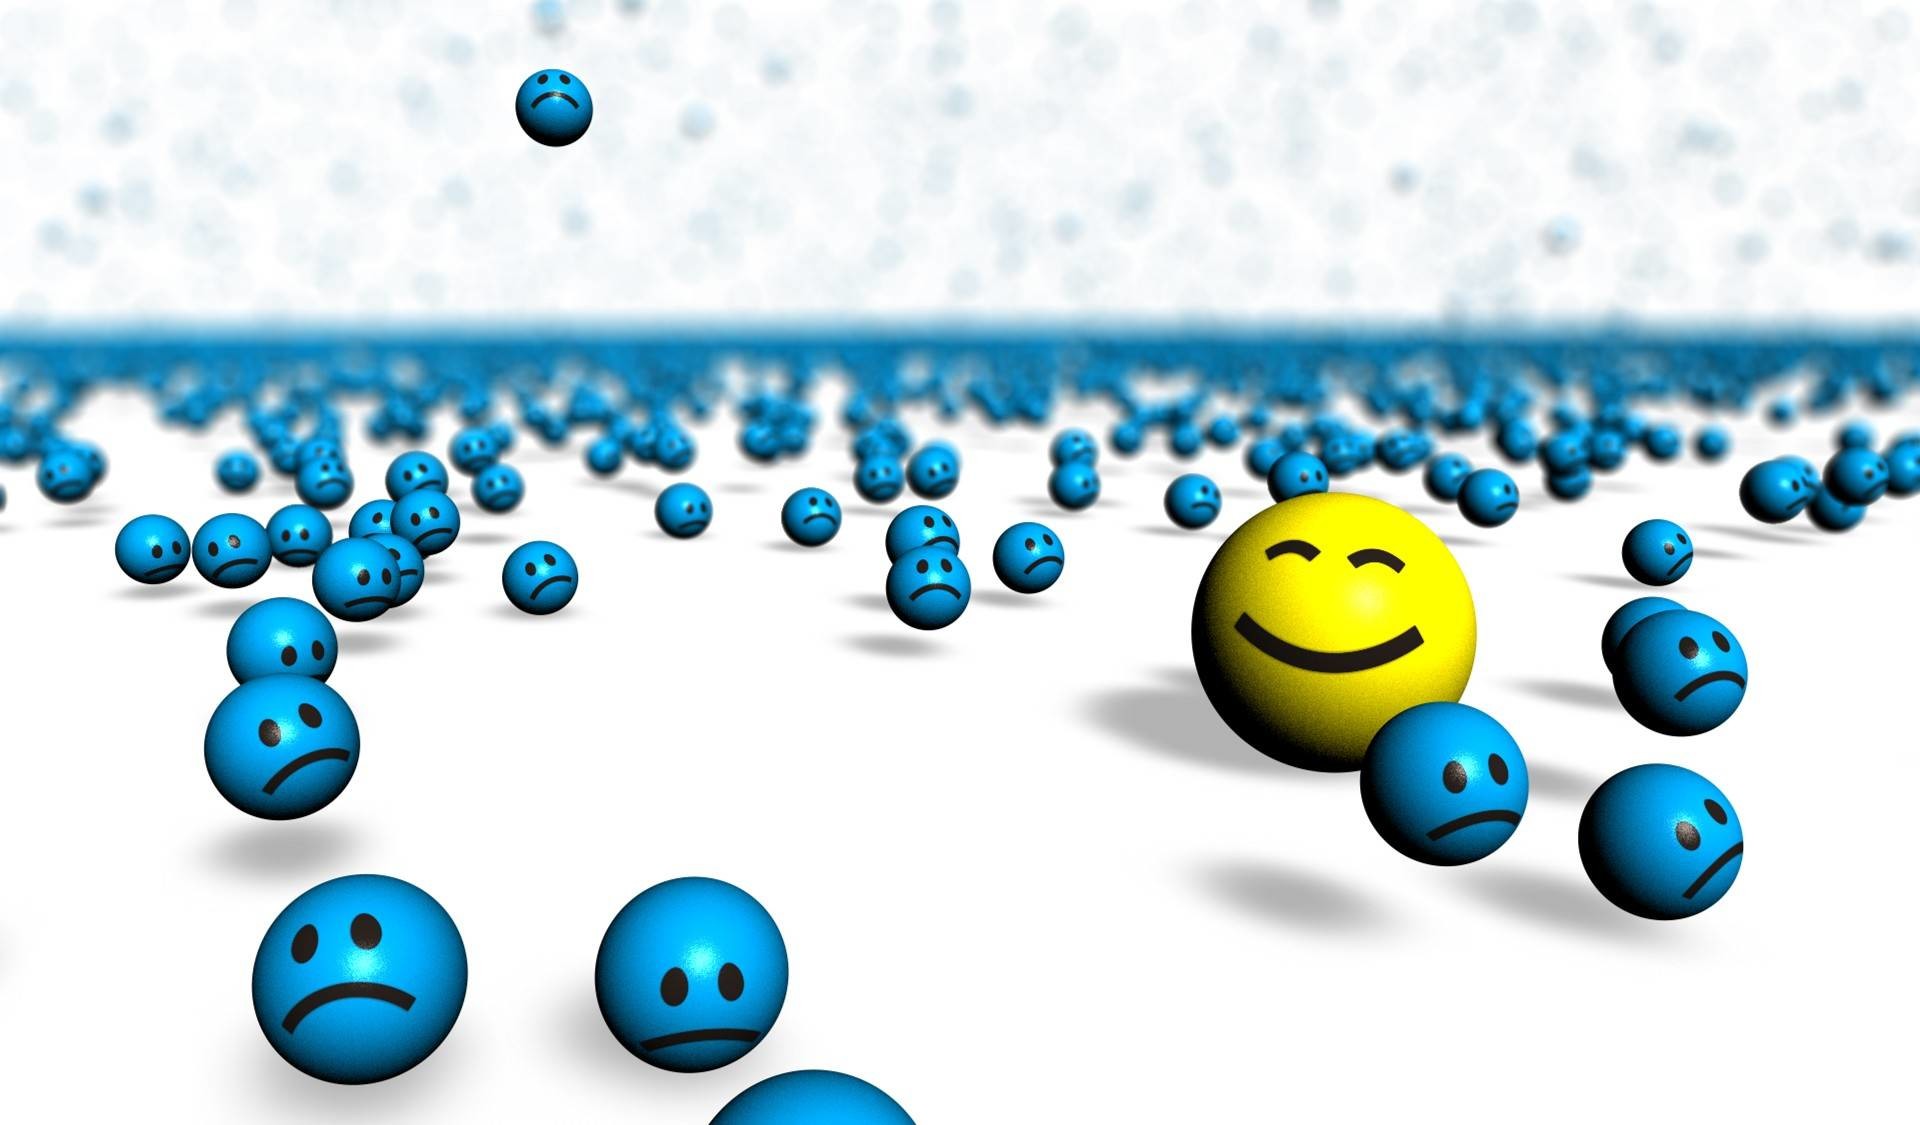 Blue Smiley Faces Background Seamless Background Image Wallpaper or  Texture free for any web page desktop phone or blog